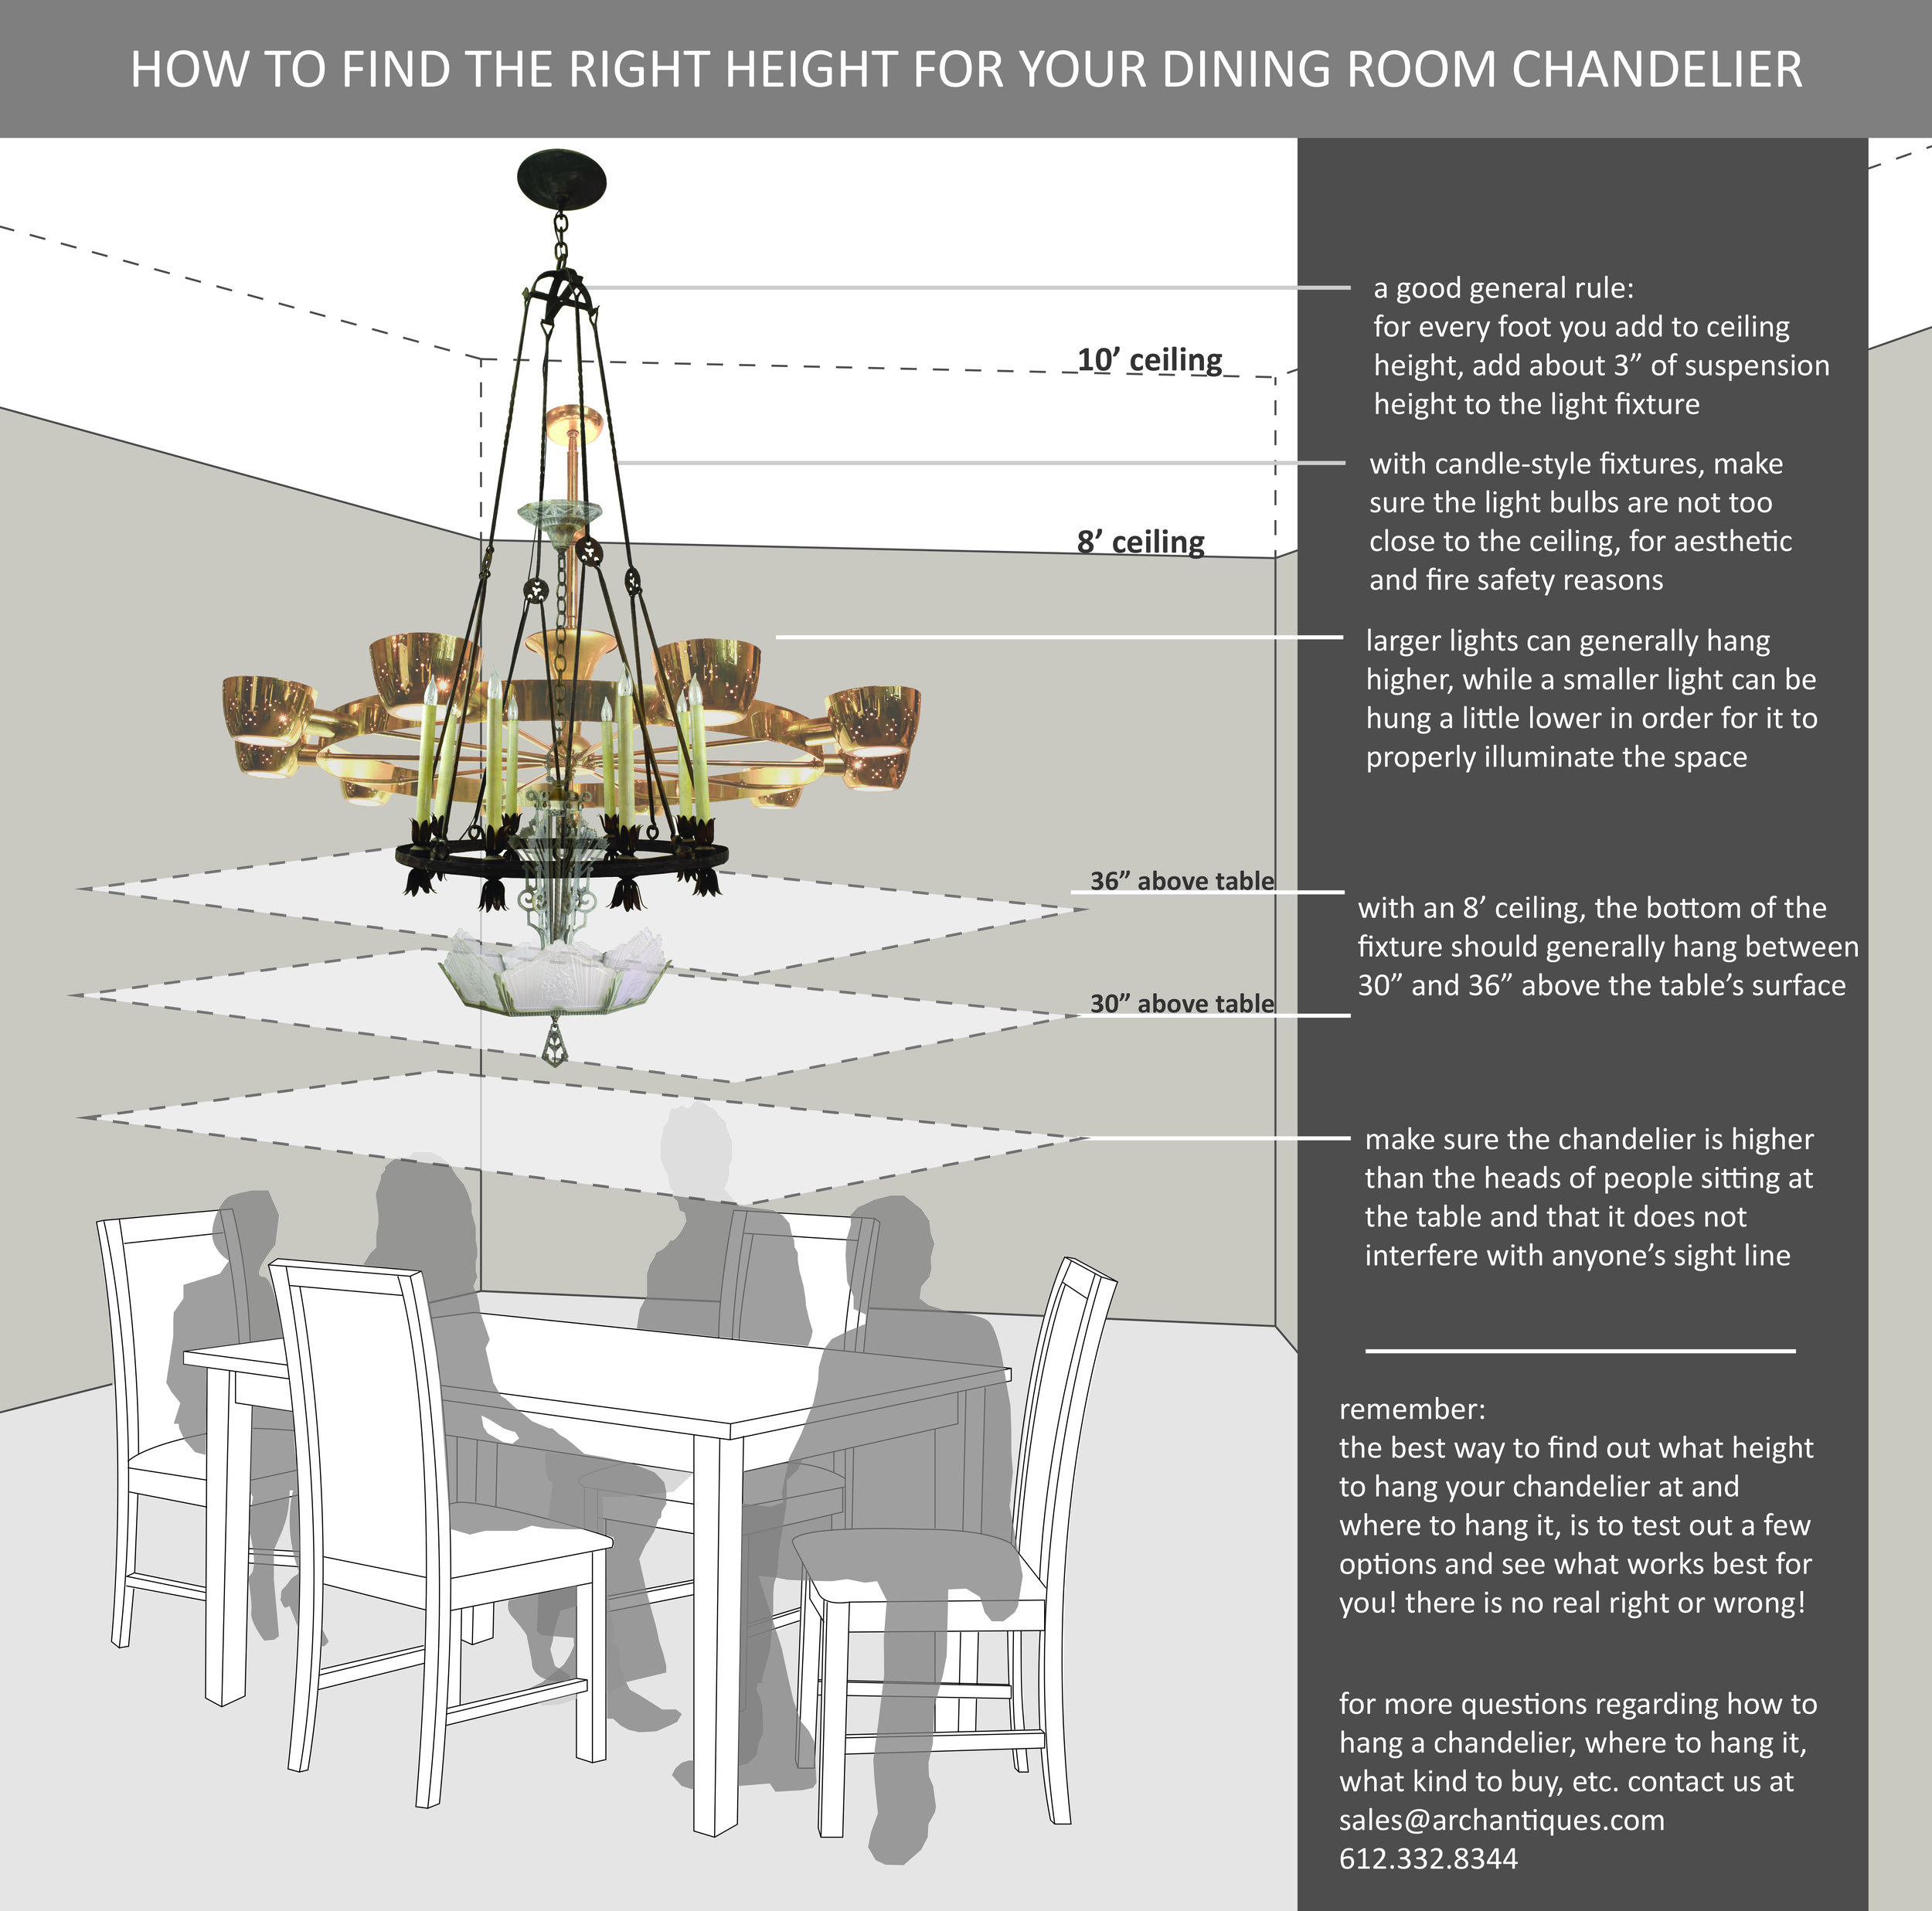 Hanging Height For Your Chandelier, What Size Chandelier Above Table